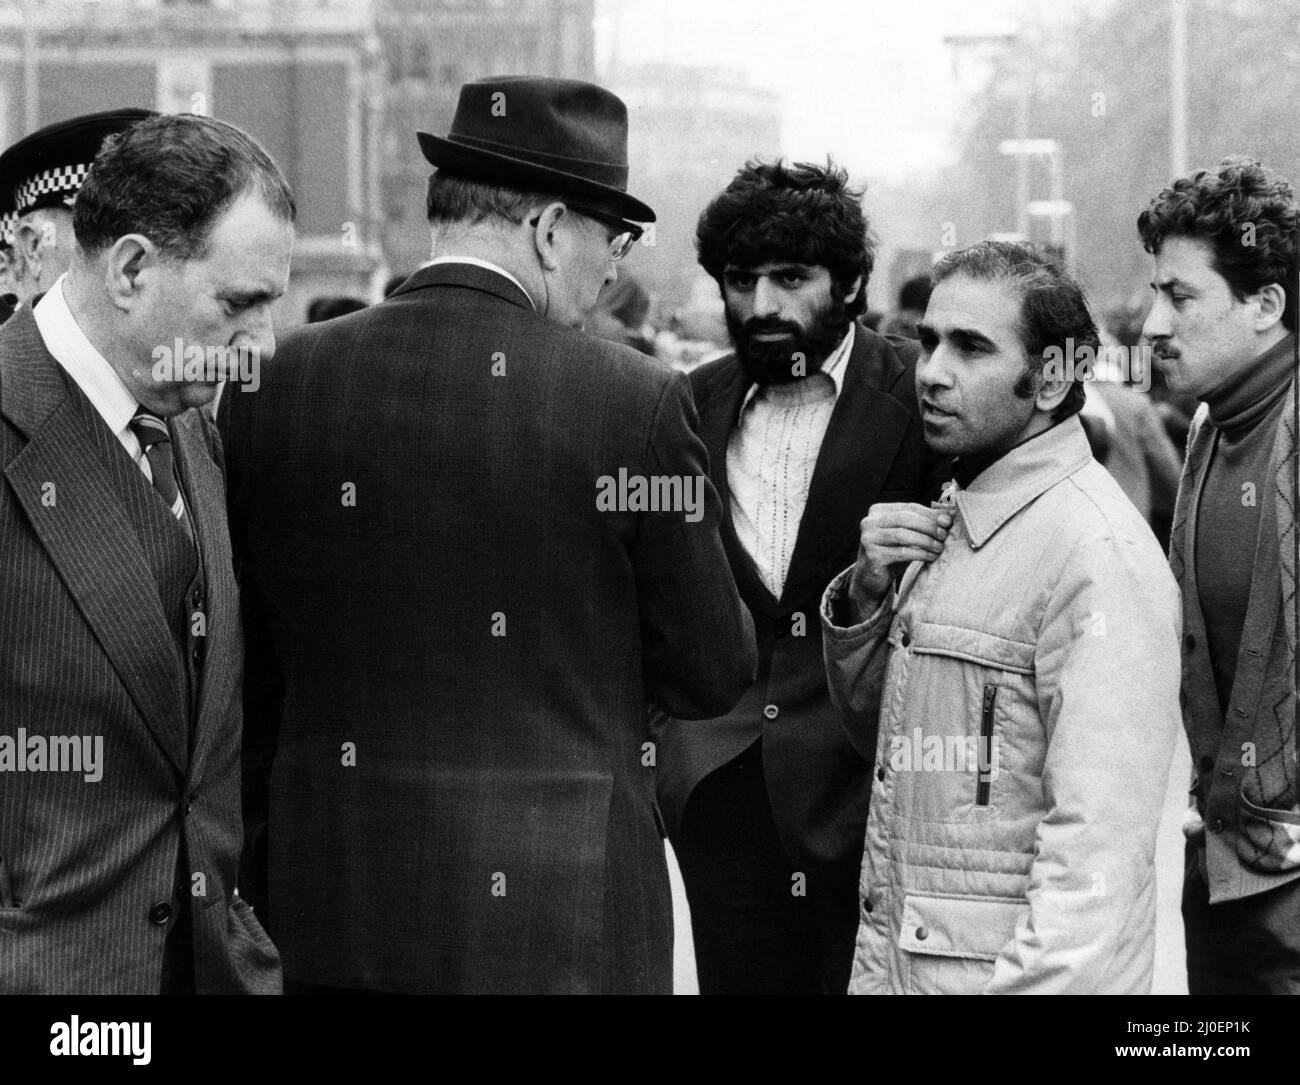 Third day of the Iranian Embassy Siege in London where six gunmen of the Iranian extremist group 'Democratic Revolutionary Movement for the Liberation of Arabistan' stormed the building, taking 26 hostages before the SAS retook the embassy and freed the hostages. The Iranian Consul General (wearing light coat) talking with police officers outside the Embassy building. 2nd May 1980. Stock Photo